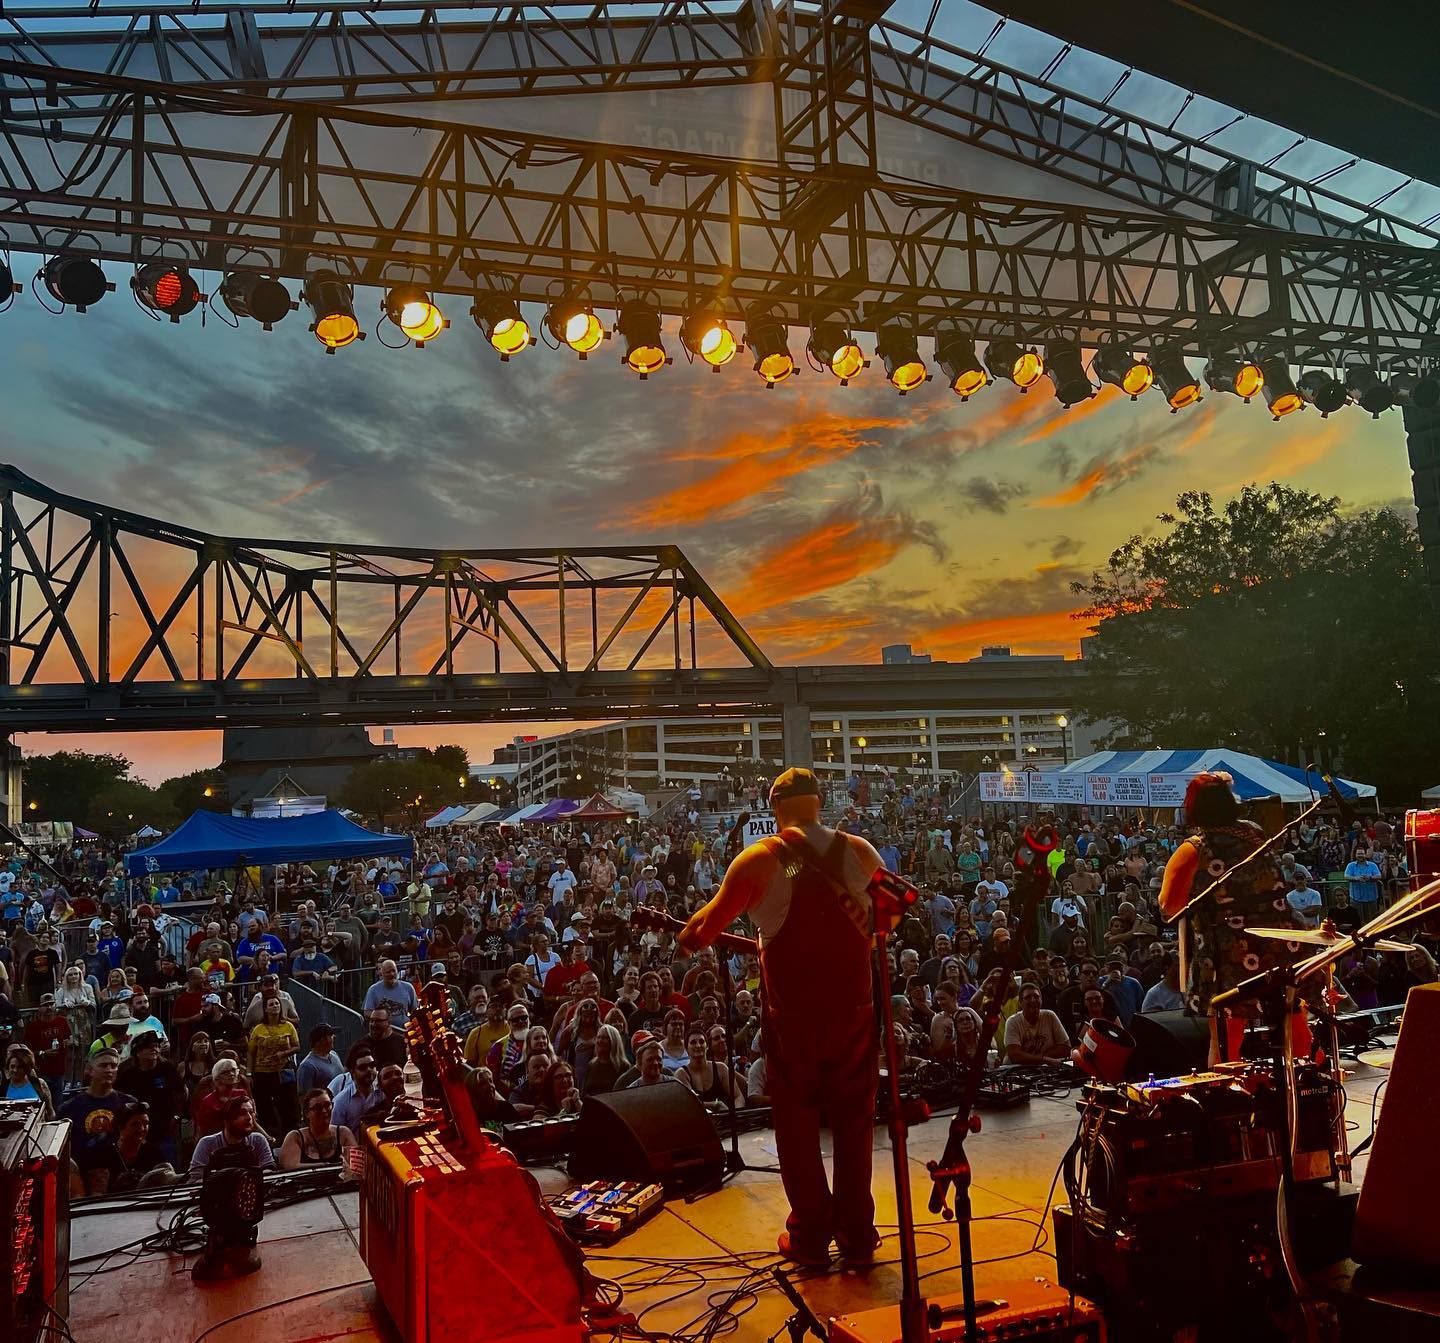 ABOUT Peoria Blues and Heritage Music Festival